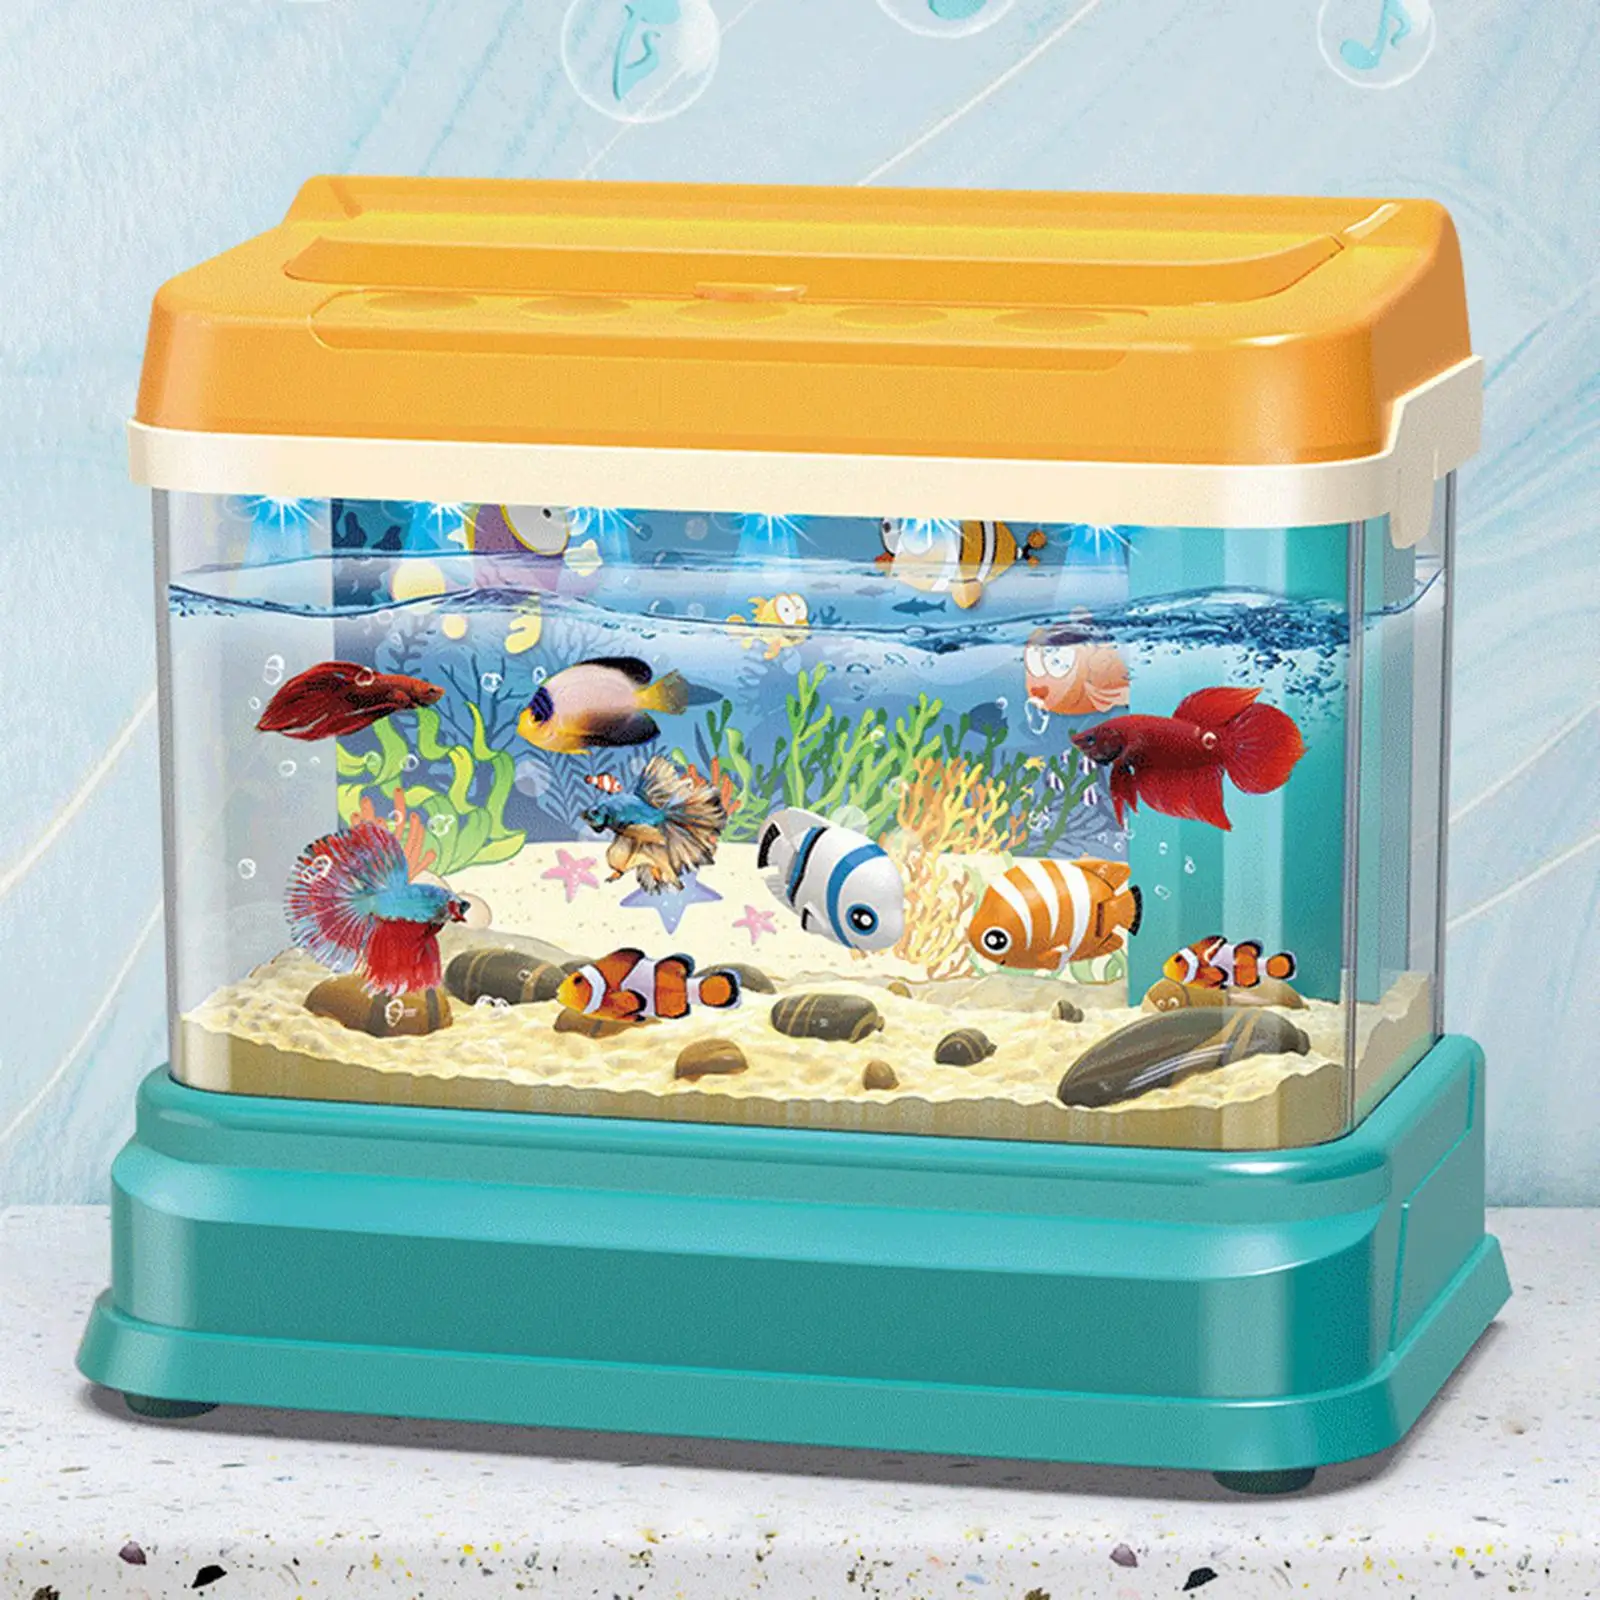 Simulation Electric Fish Tank Educational Toys with USB Light Kids Fishing for Children